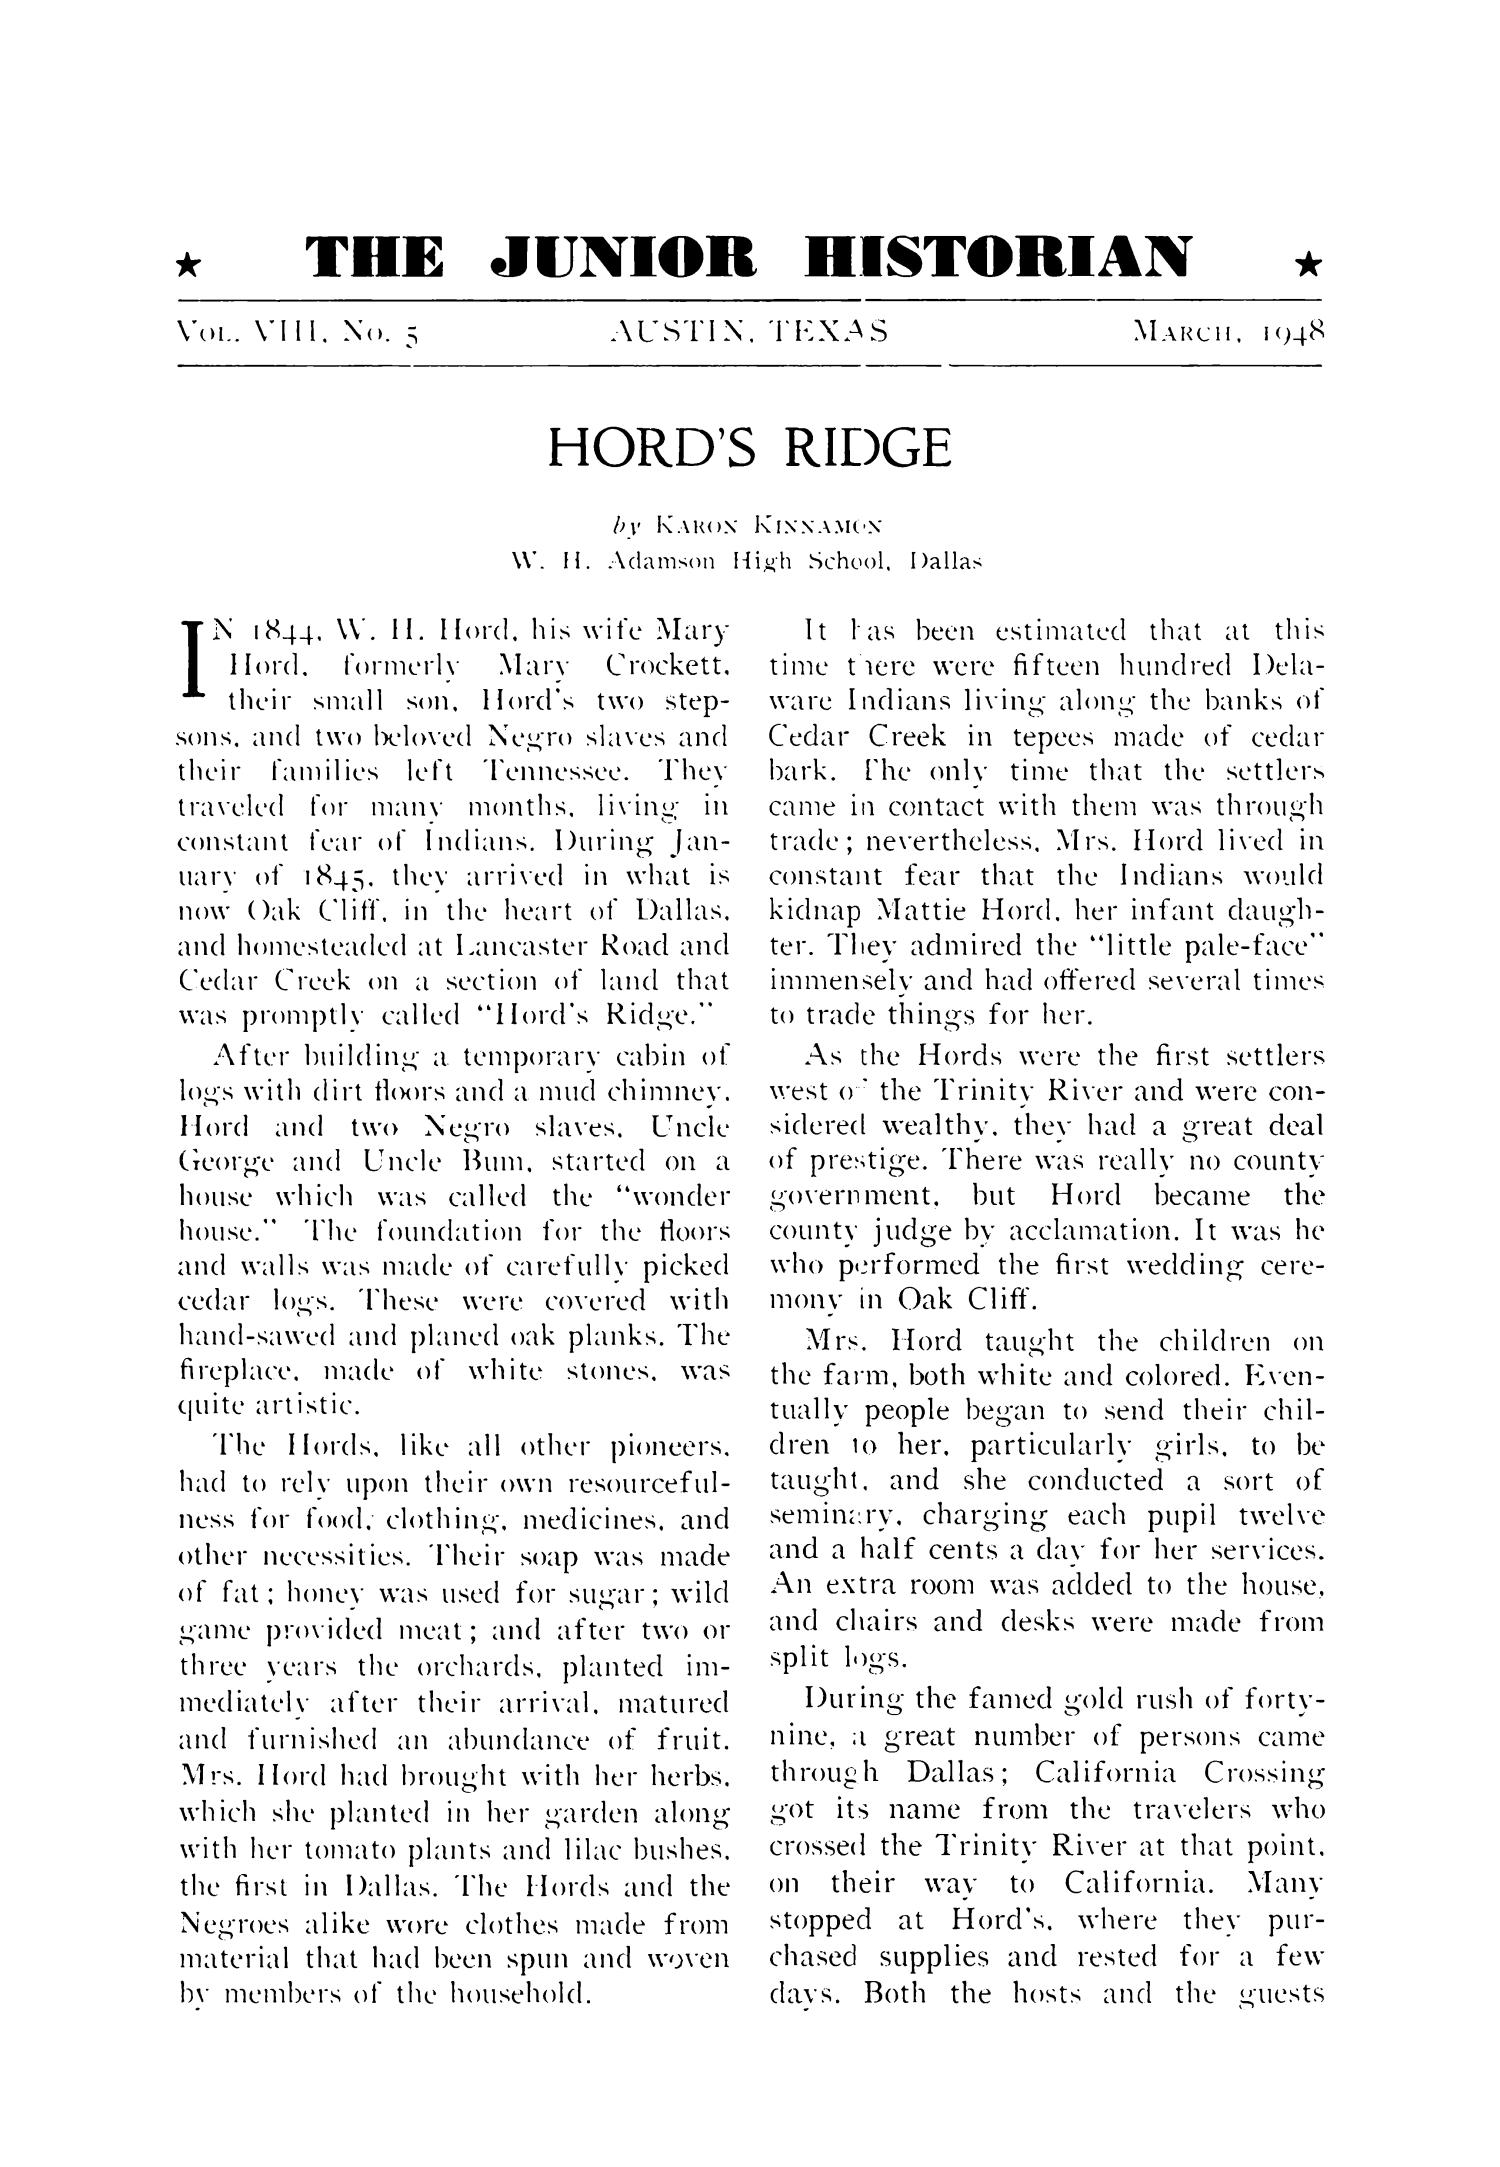 The Junior Historian, Volume 8, Number 5, March 1948
                                                
                                                    1
                                                